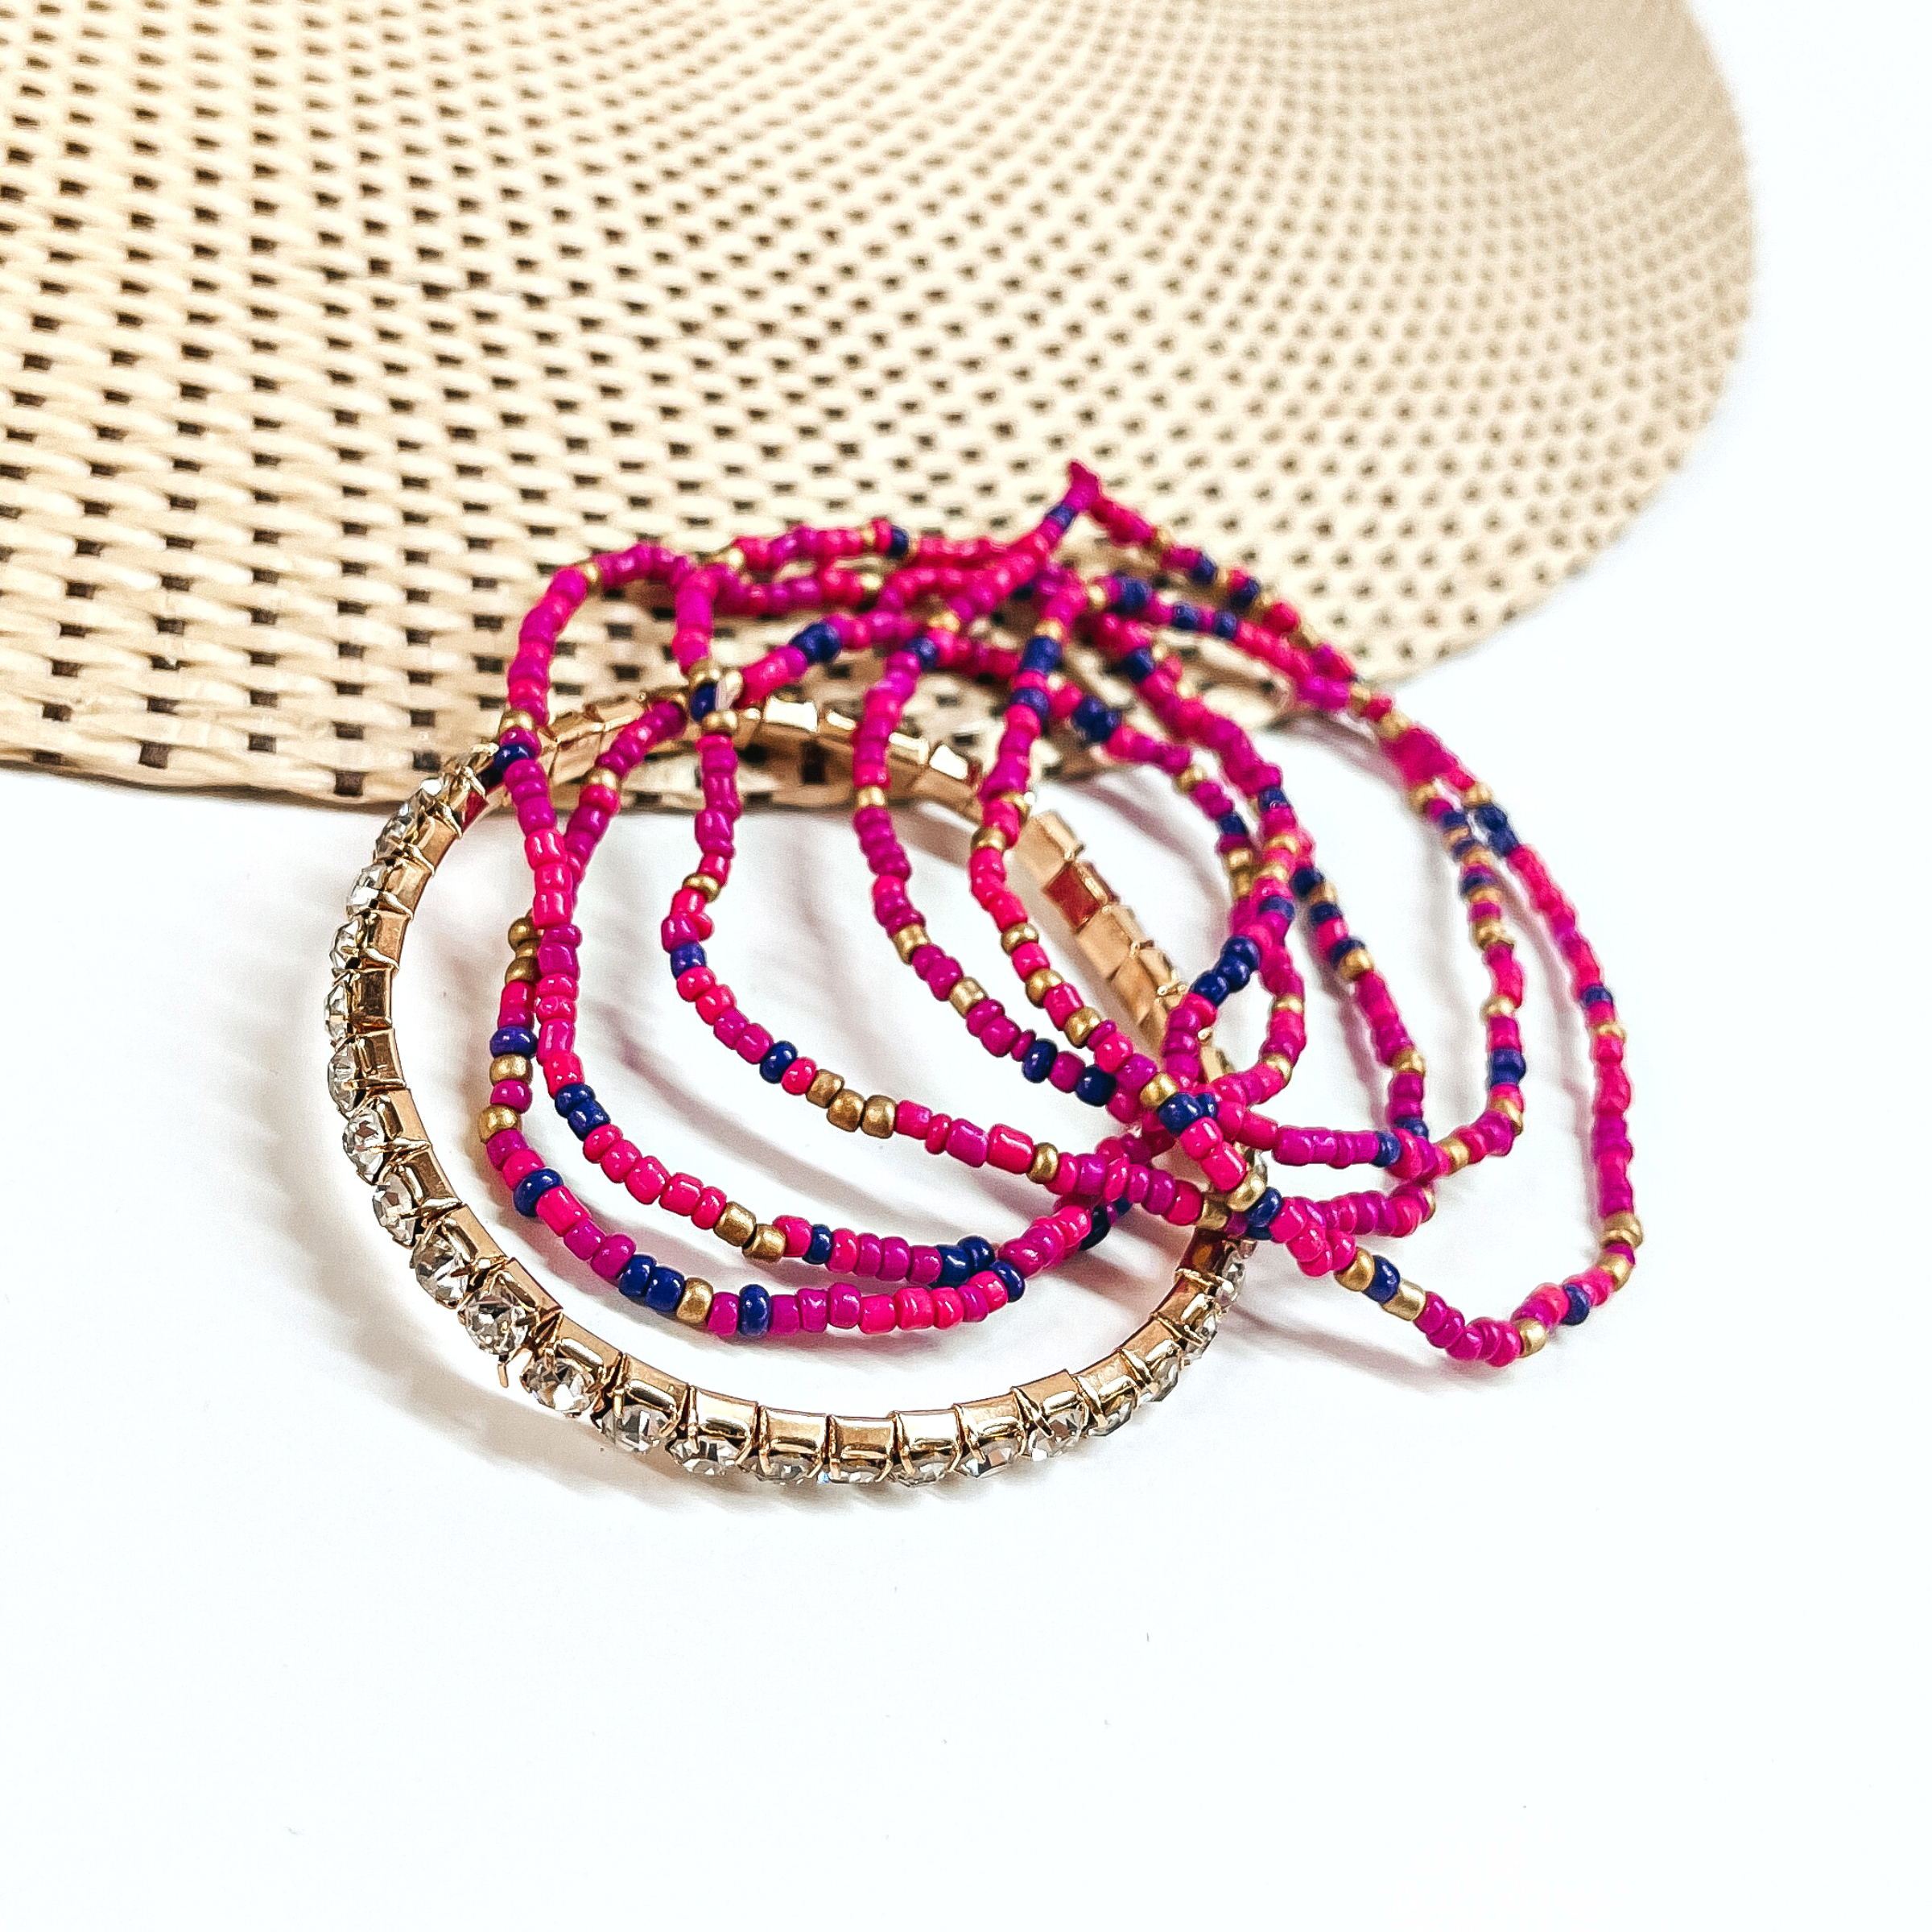 This is a set of six bracelets in a pink/purple mix  There are five seedbeaded bracelets in hot pink, purple, fuchsia, and gold.  There is a one clear rhinestone bracelet in a gold setting.  These bracelets are laying partly on a straw hat and a white background.